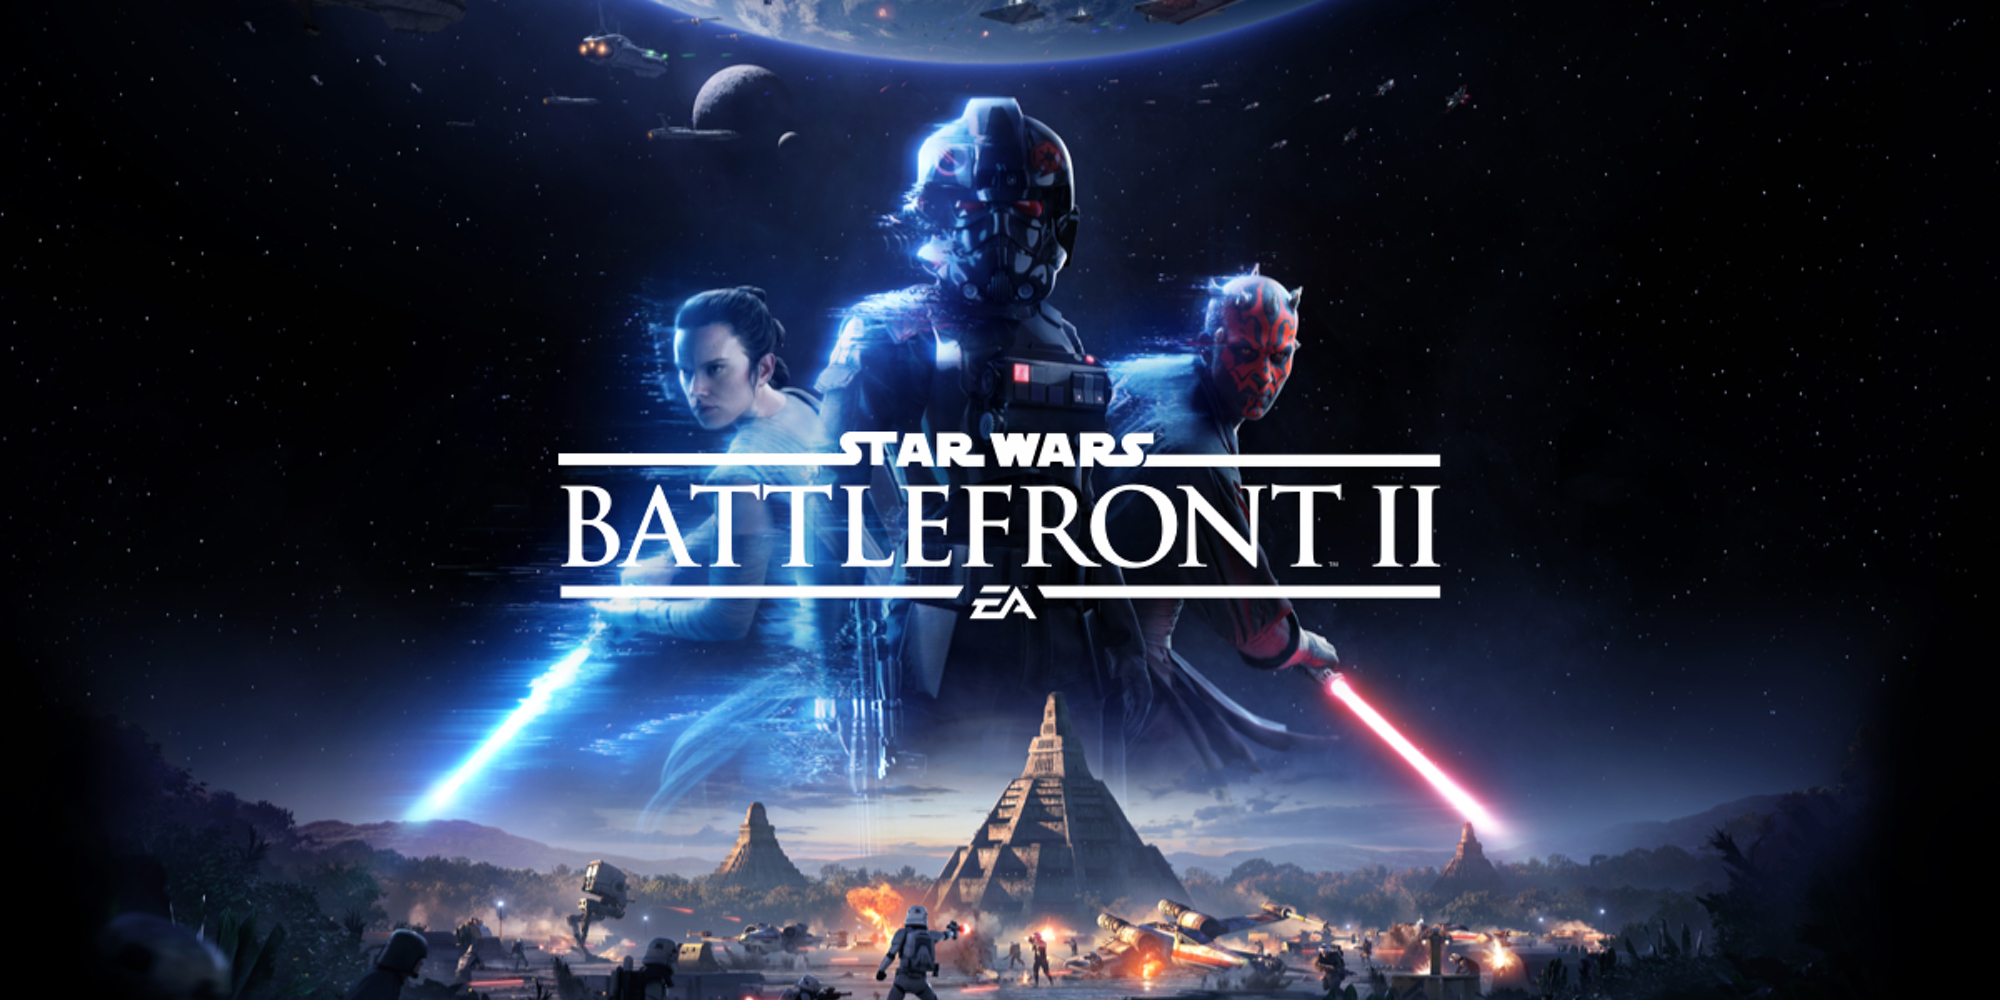 where to do you get star wars battlefront ea dlcs?